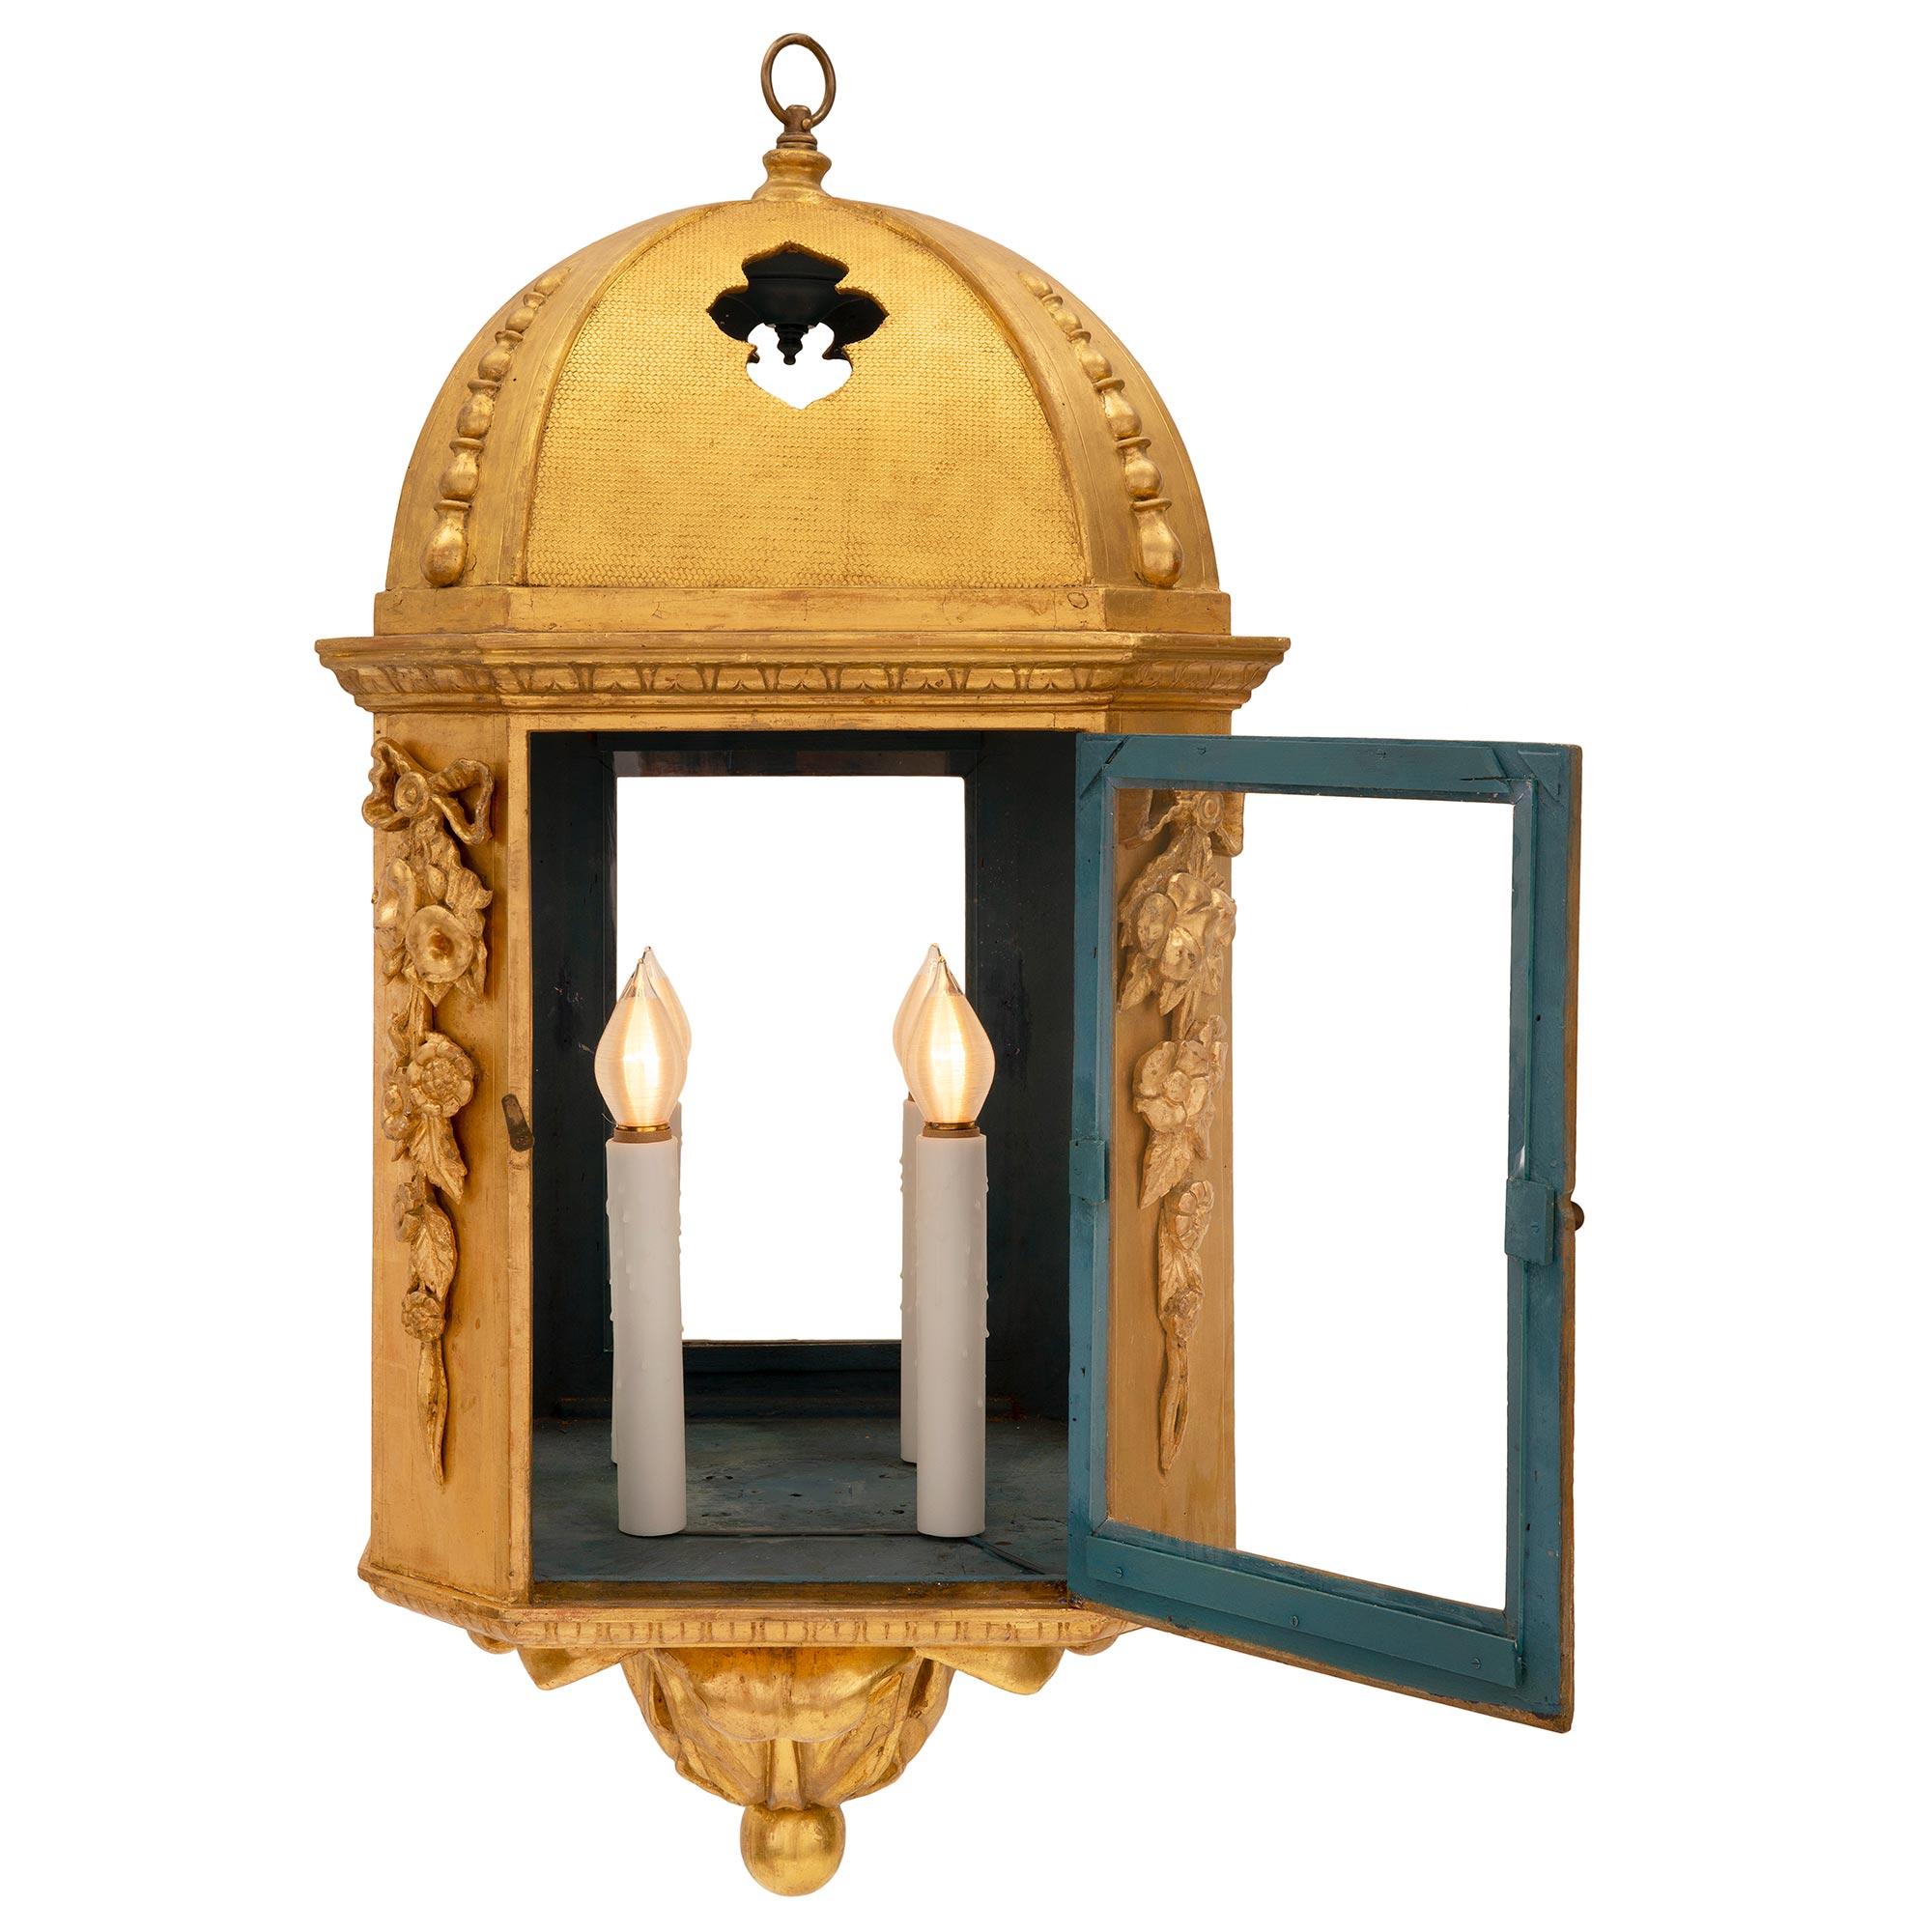 A striking and most decorative pair of Italian 18th century Baroque st. giltwood lanterns. Each octagonal lantern is centered by a beautiful bottom foliate finial with a fine ball. Above the mottled foliate bands are hand blown fitted glass panes